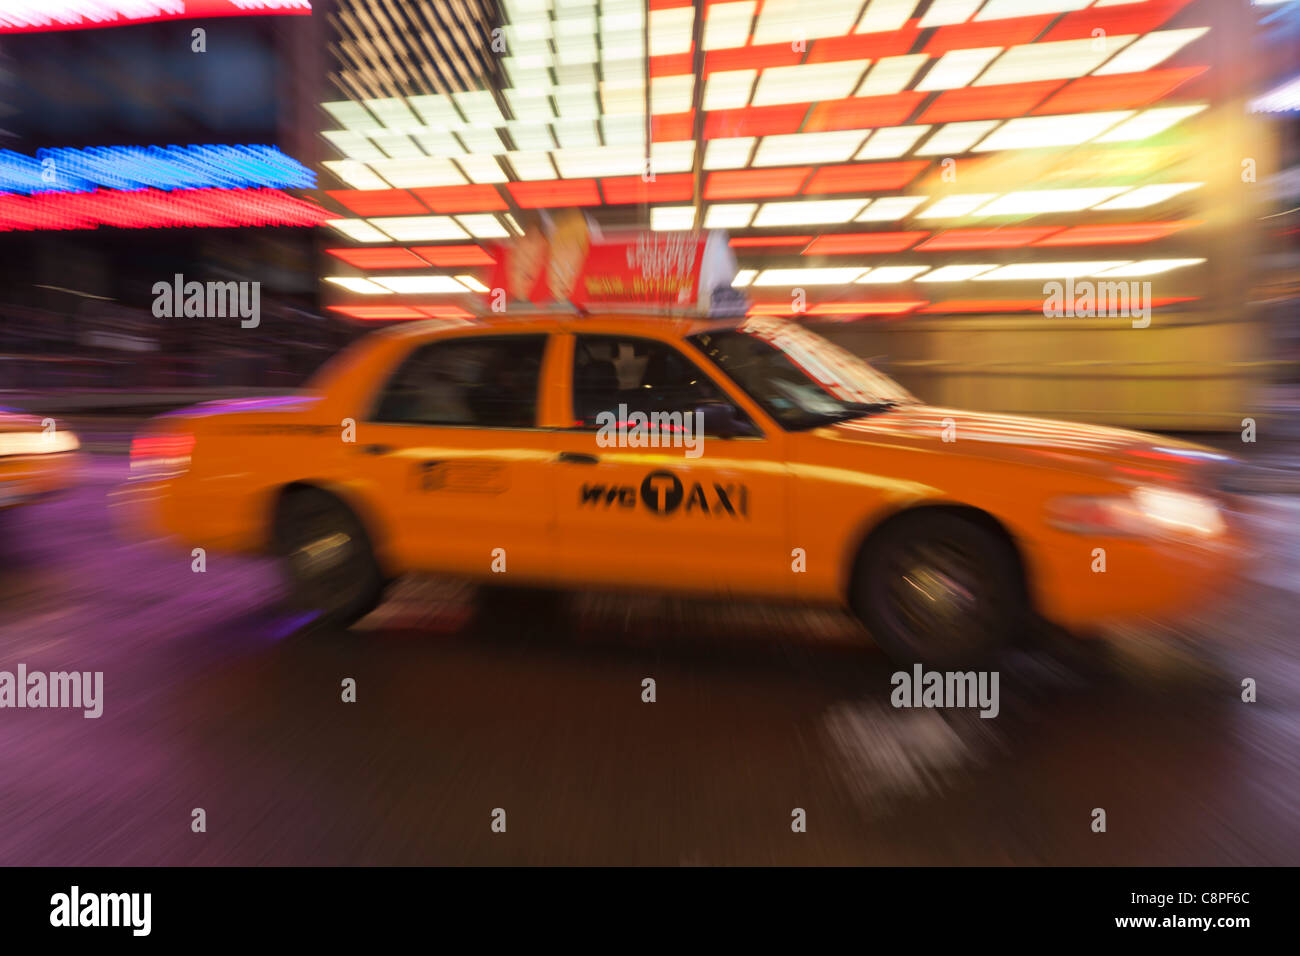 A yellow taxi cab is a blur as it rushes through the lights of Times Square at night in New York City. Stock Photo